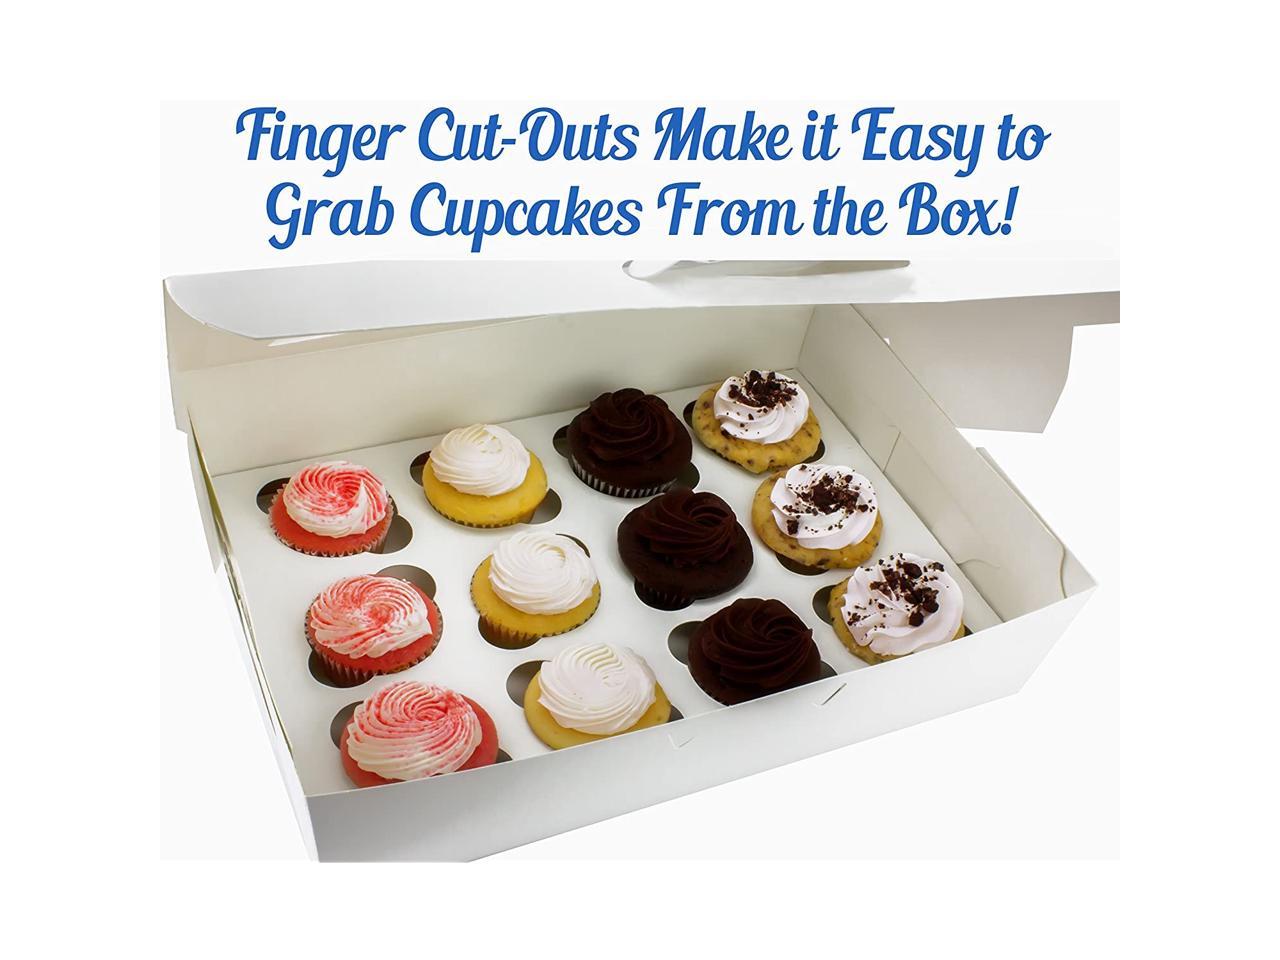 Pro-Quality Bakery Boxes for Cupcakes with Display Window and Cupcake  Inserts 12 Pack. Each Recyclable, Bright White Box Displays 1 Dozen Cup  Cakes. 